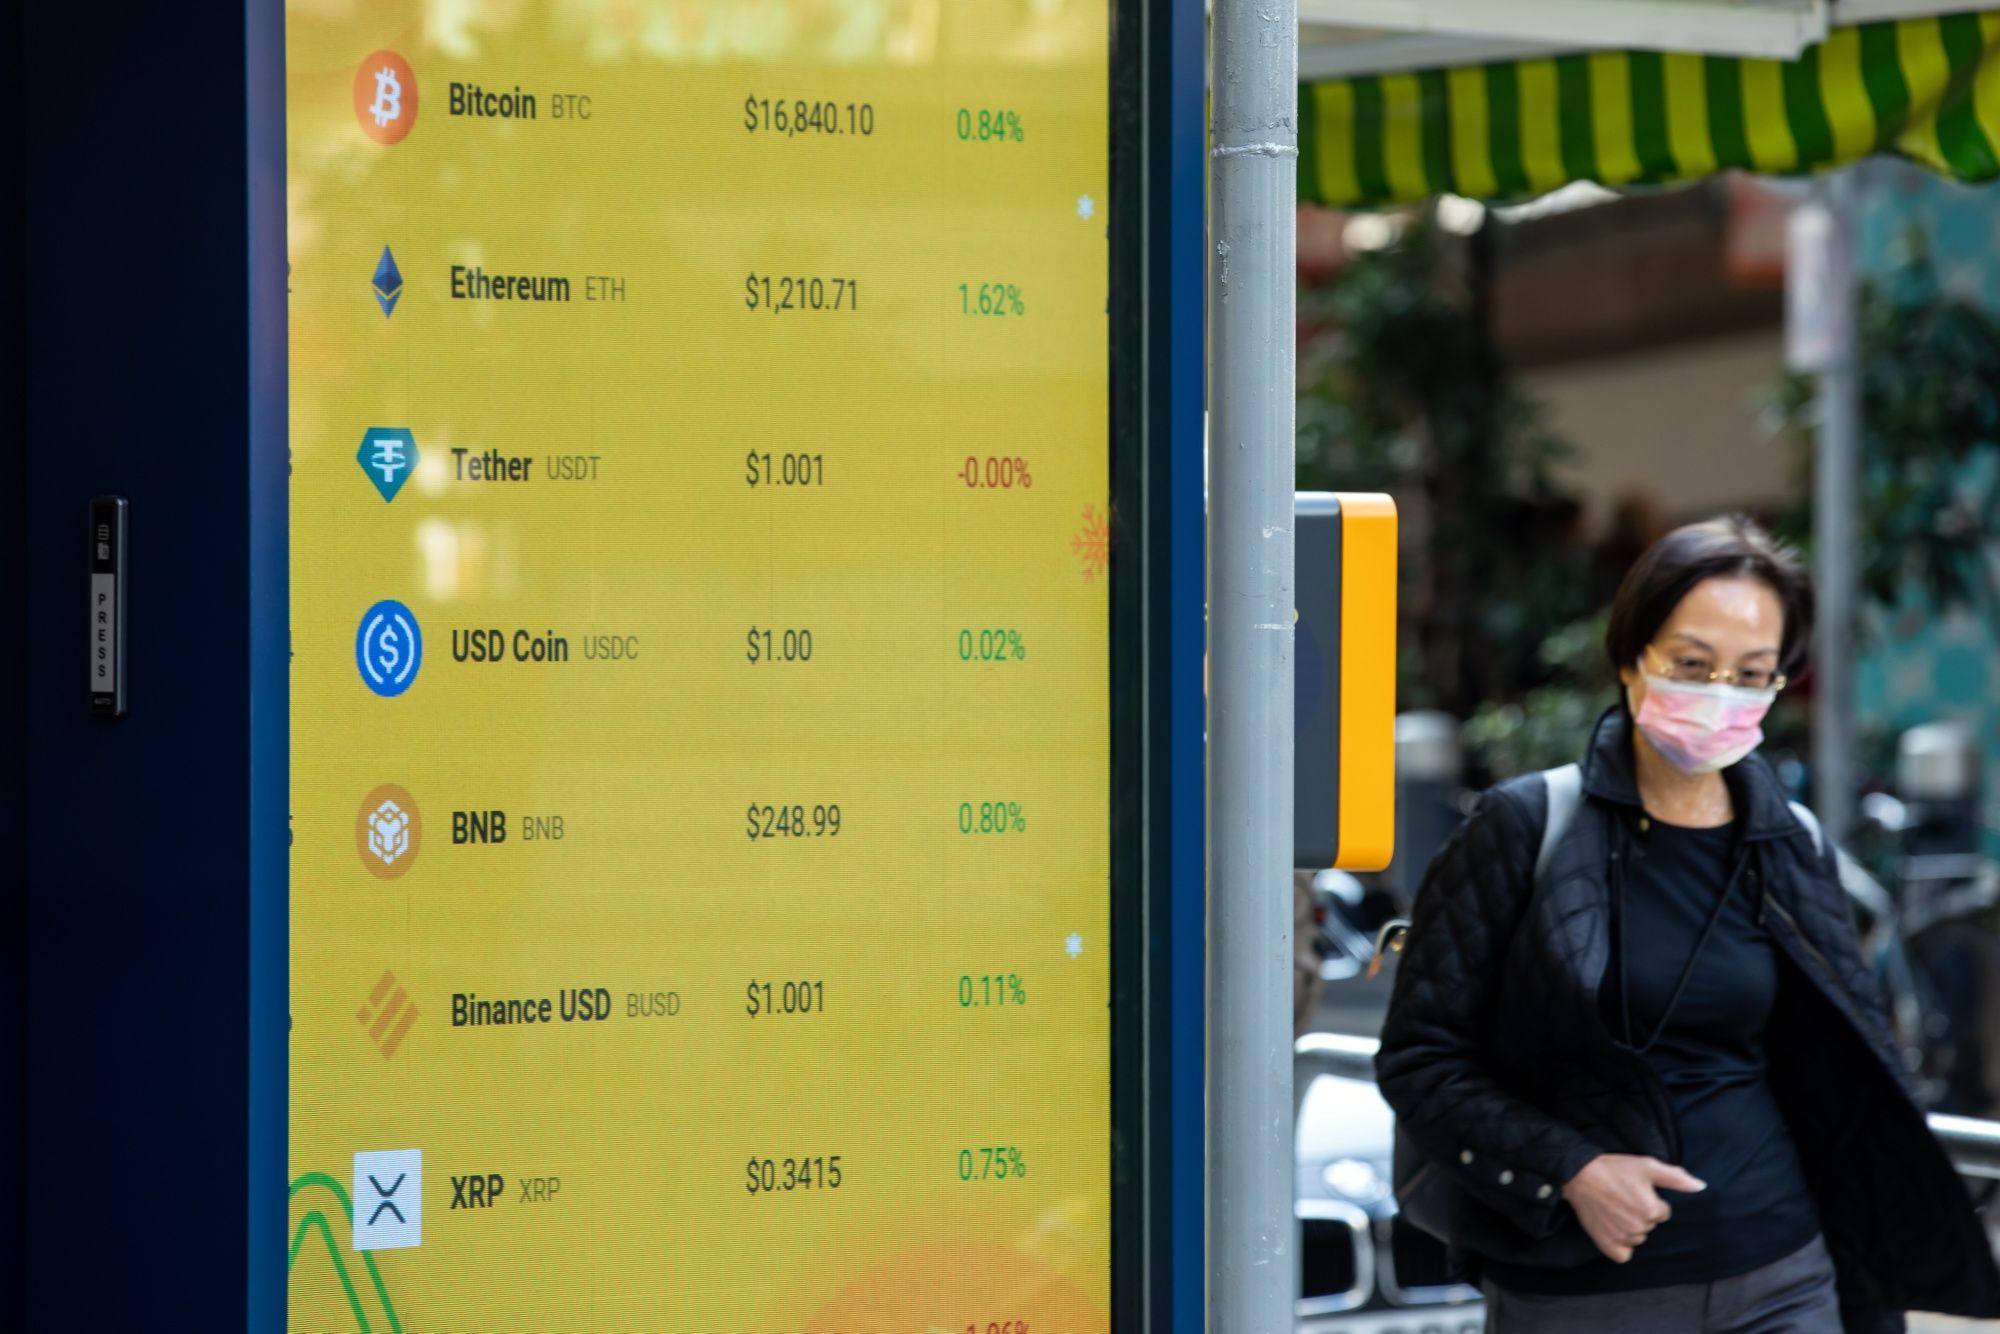 SFC puts small Hong Kong crypto exchanges under glare of public scrutiny. Photo: Bloomberg